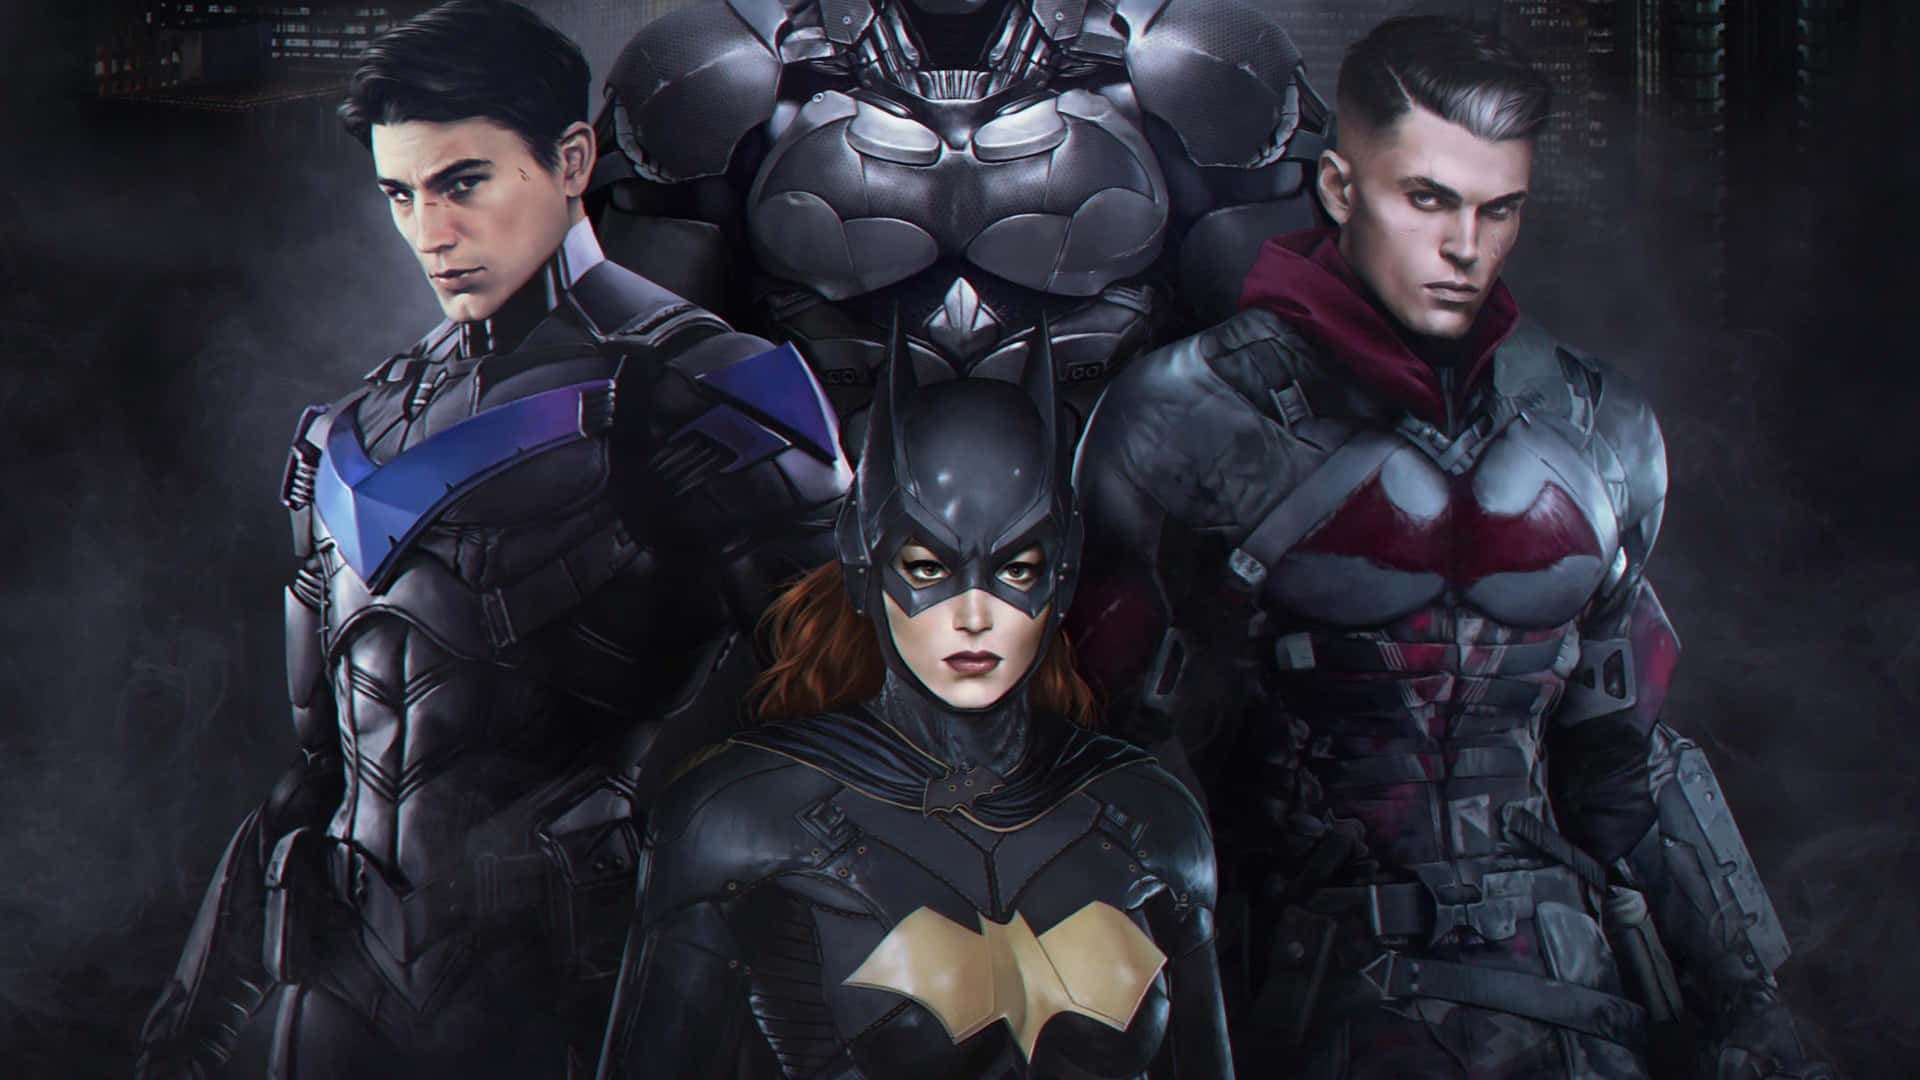 United Bat-family Ready for Action Wallpaper